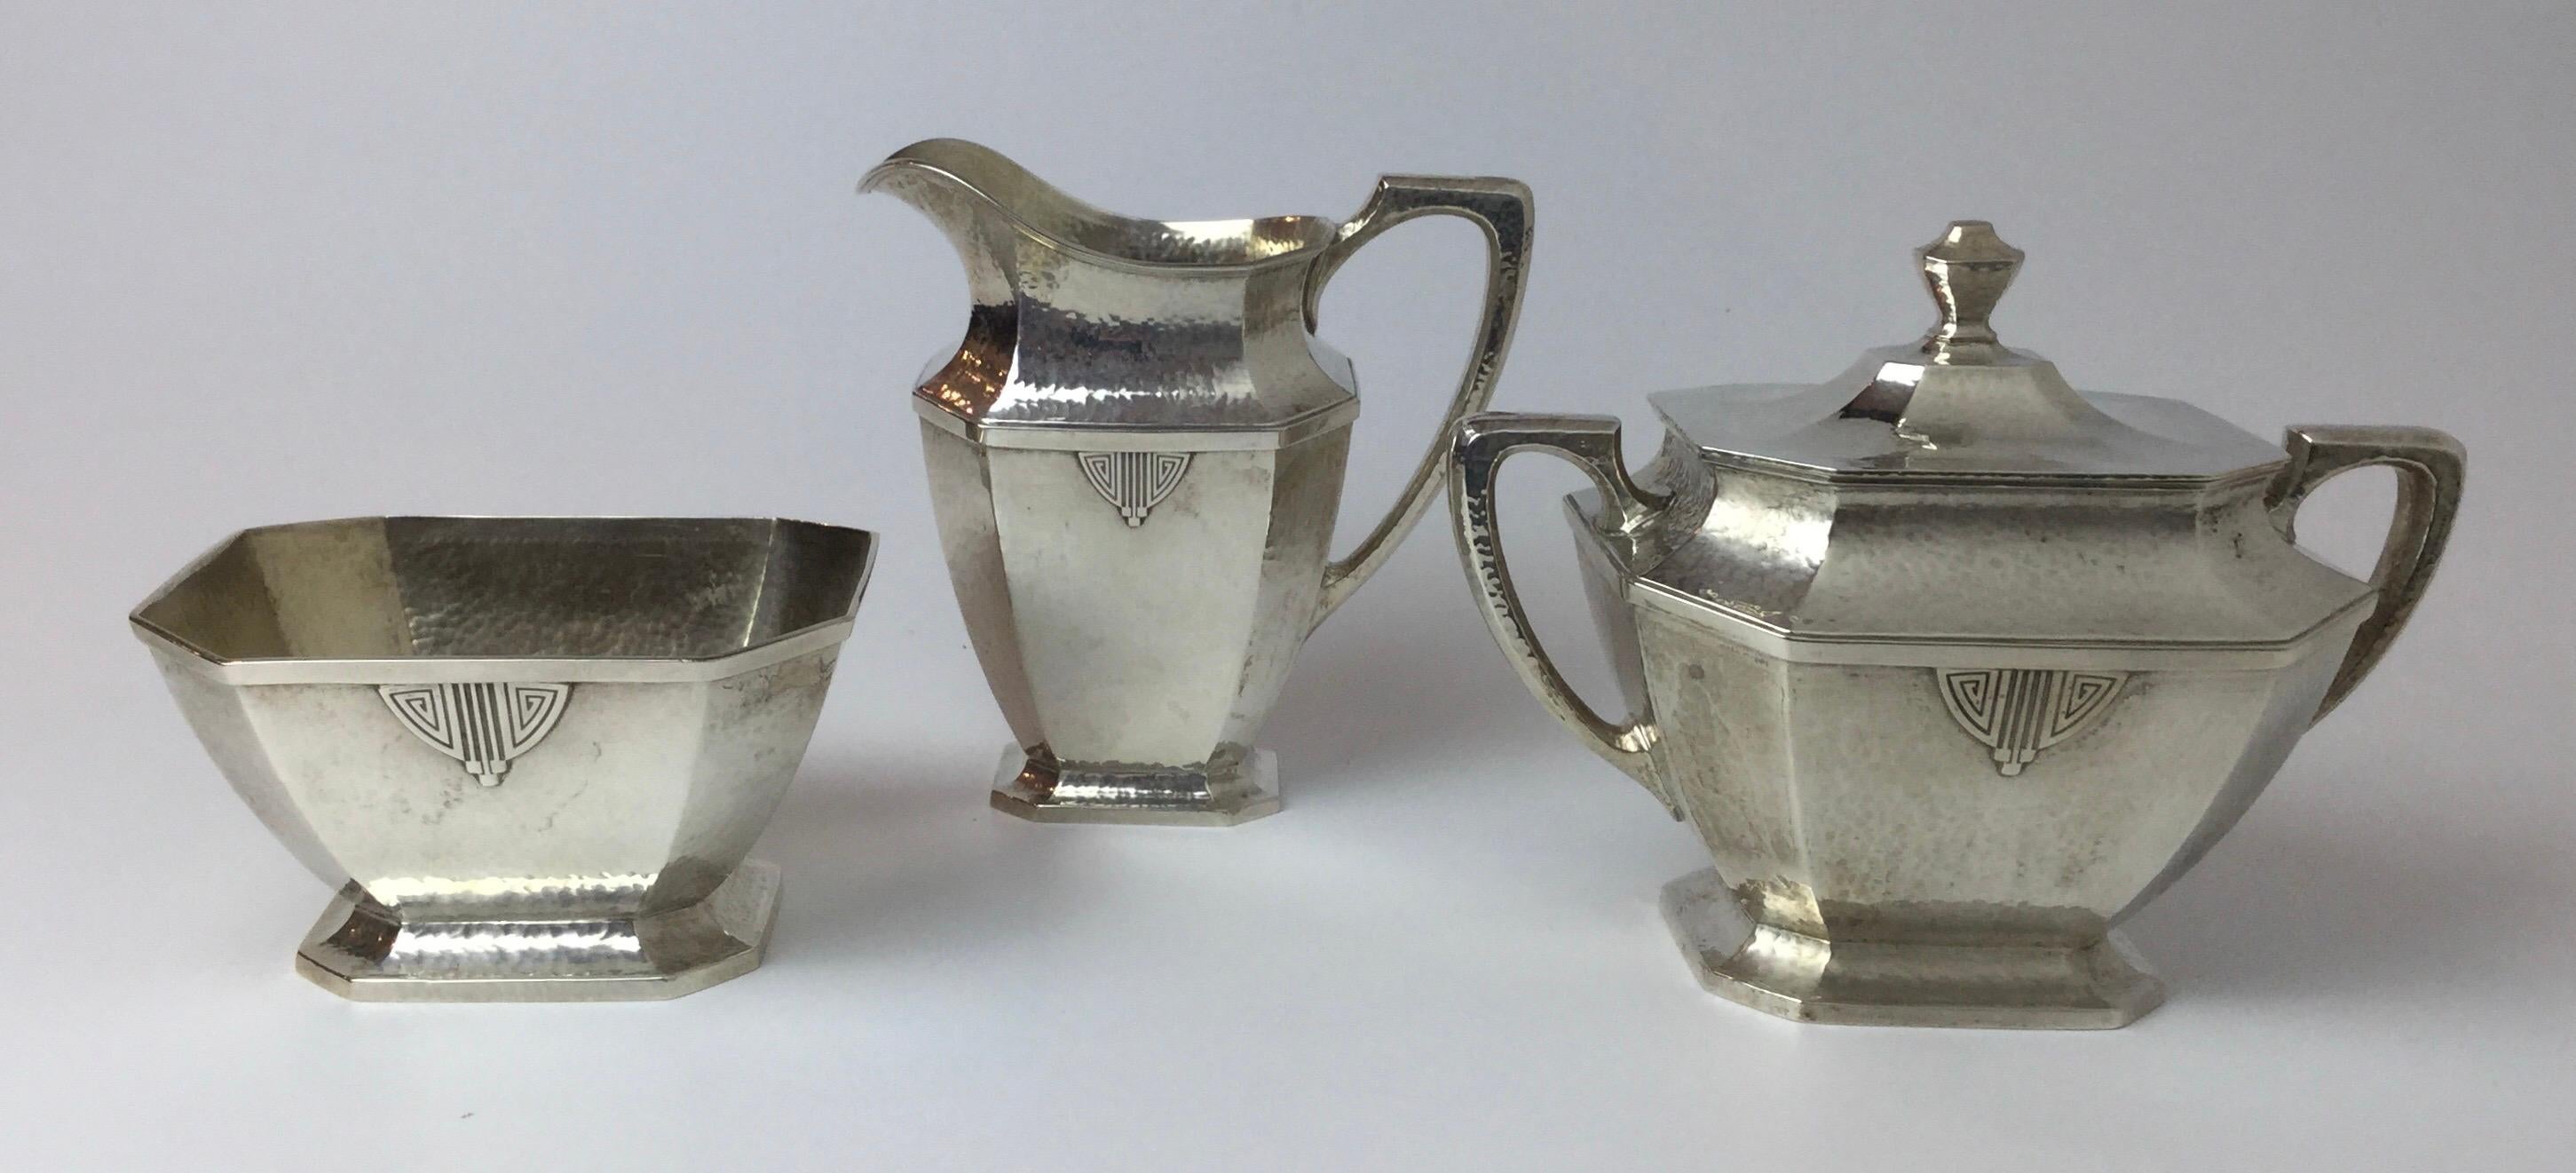 American Sterling Silver 5-Piece Tea Set by Wallace, circa 1905